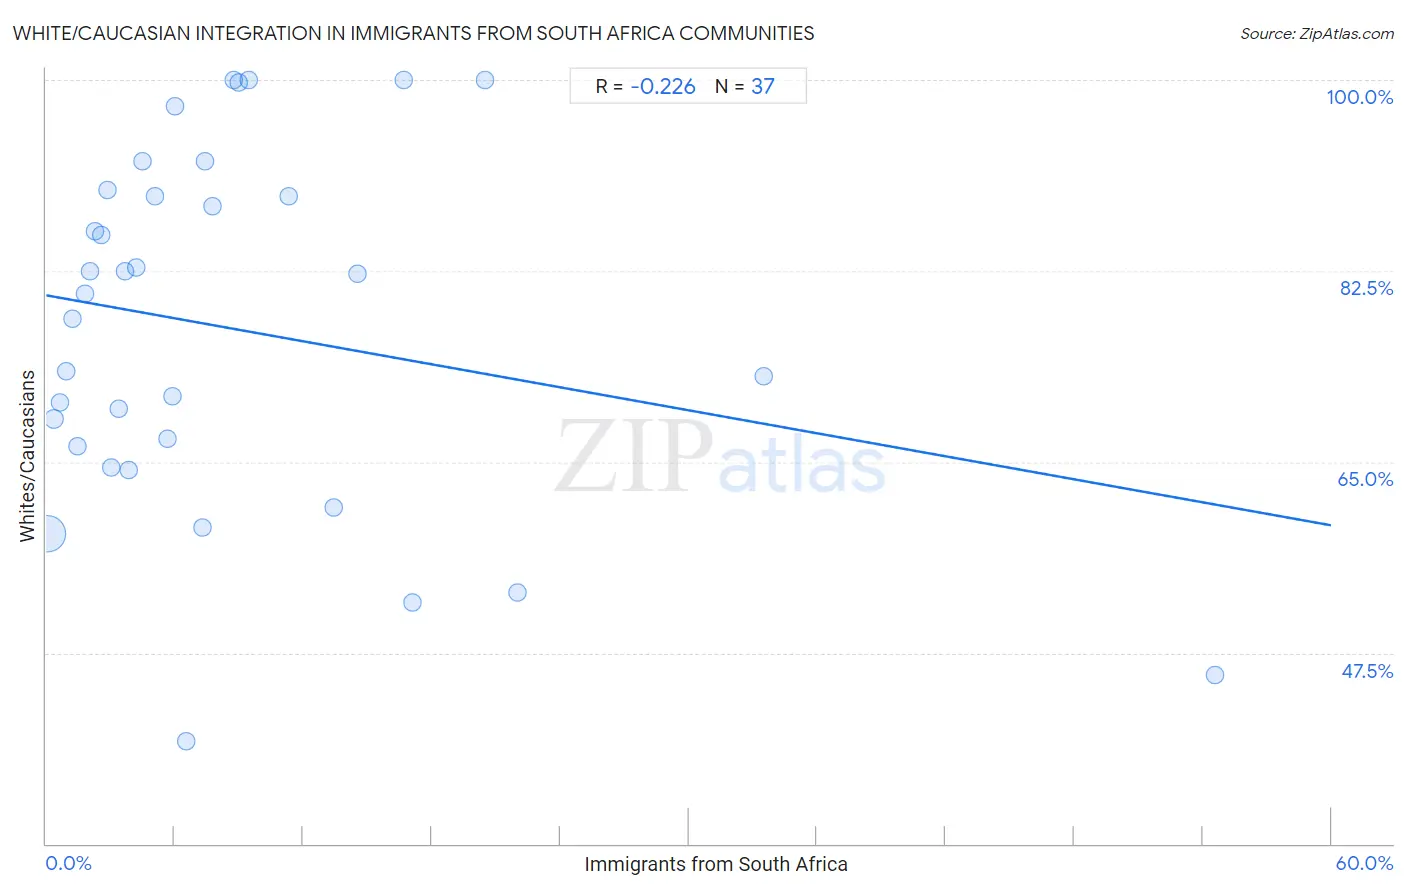 Immigrants from South Africa Integration in White/Caucasian Communities